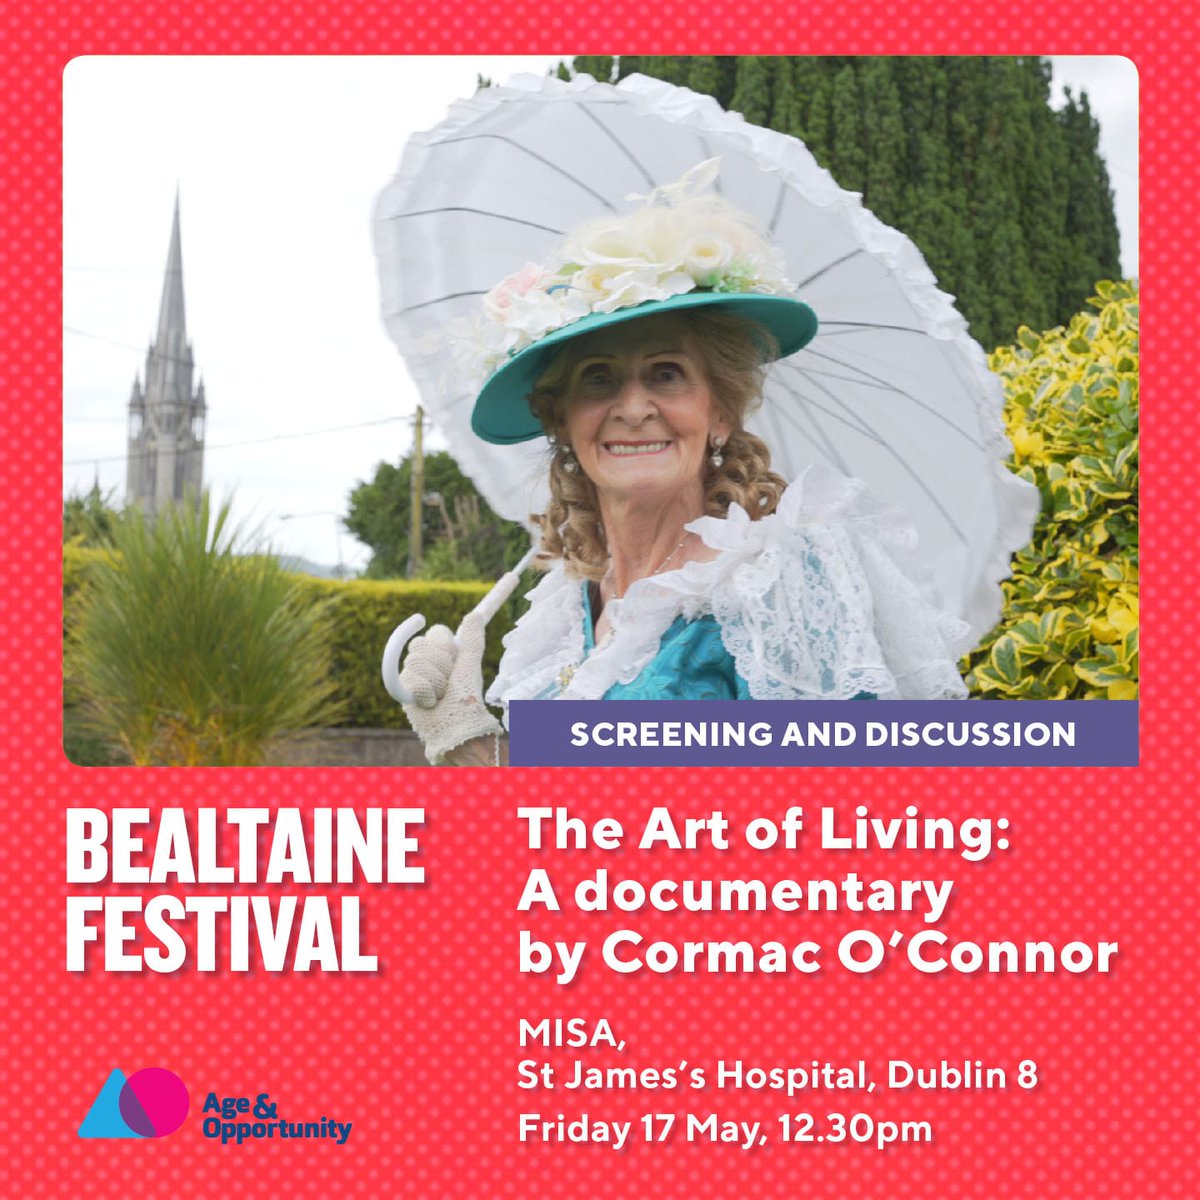 The #BealtaineFestival24 returns to MISA @stjamesdublin A special documentary 📽 'Art of Living' by Cormac O'Connor with a panel discussion 🔉17.05.24 #CreativeLifeMISA are thrilled to collaborate #ArtsCorkCoCo, @BealtaineFest @smart_d8 #PublicEvent: ⬇️ eventbrite.ie/e/documentary-…